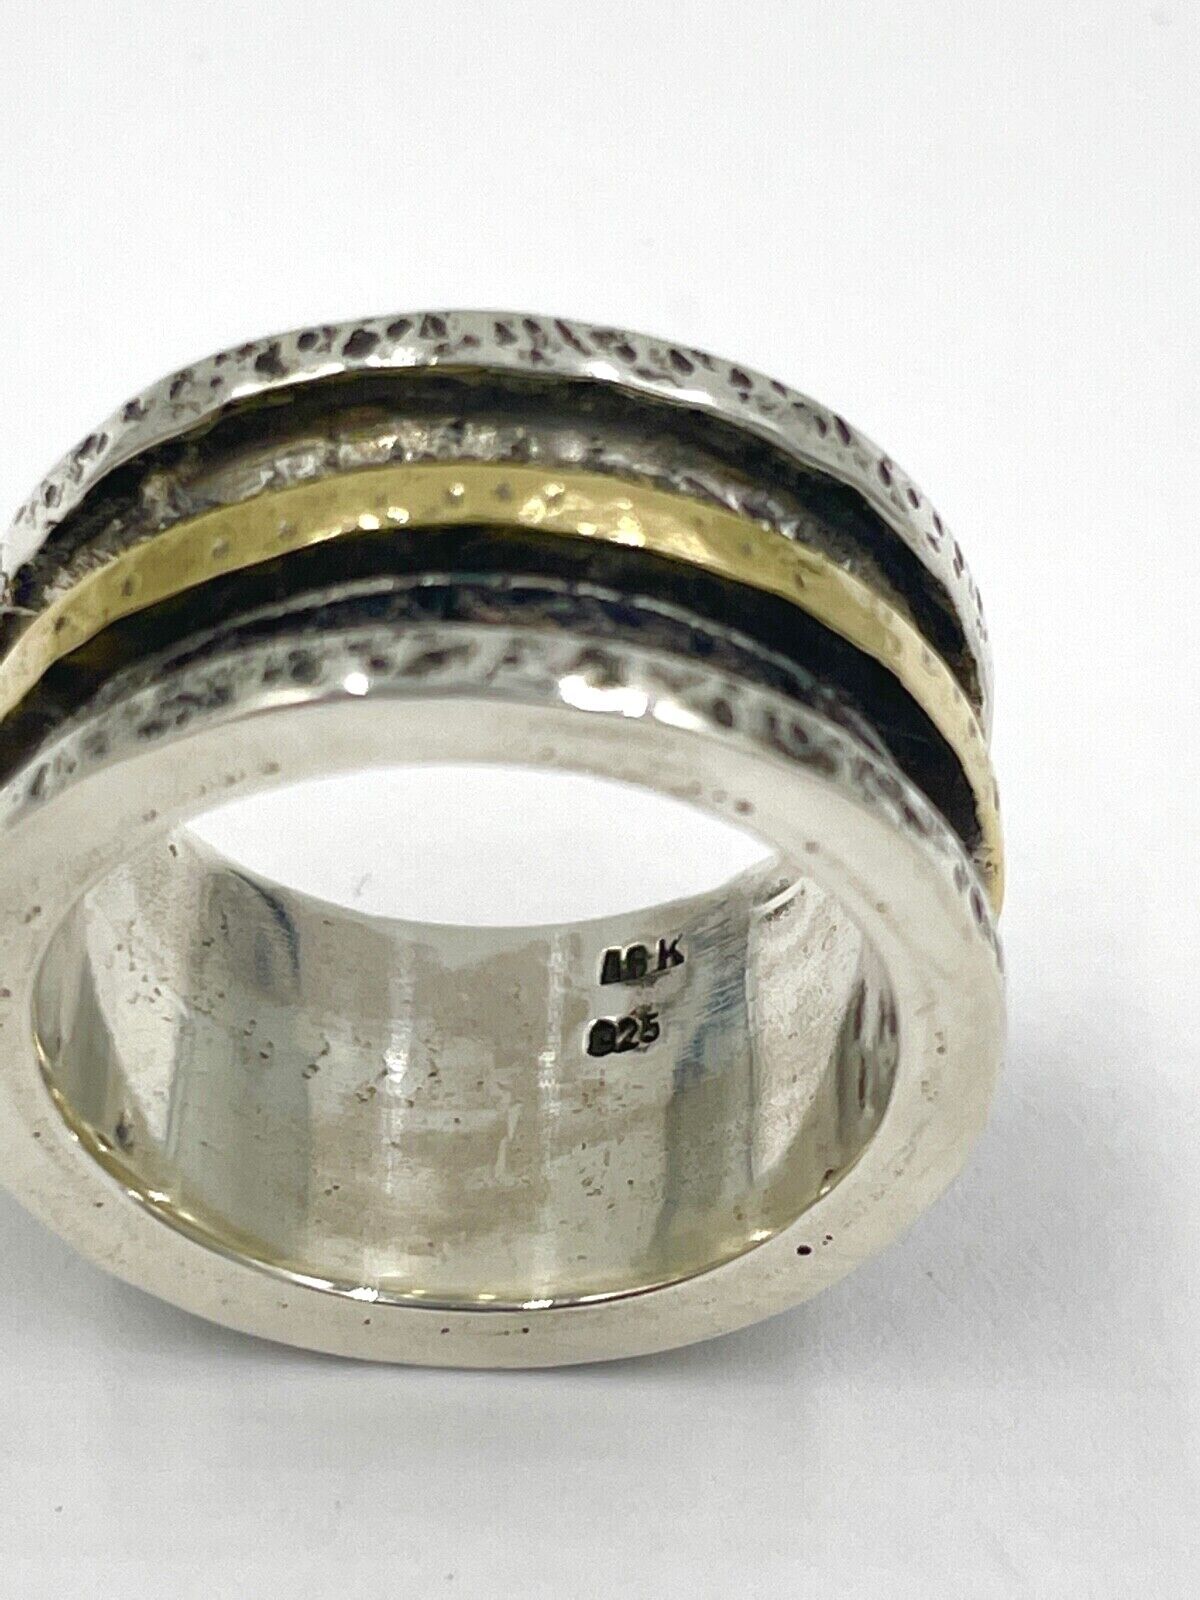 18k Gold and Sterling Silver wide band Cross Mens Ring cigar band